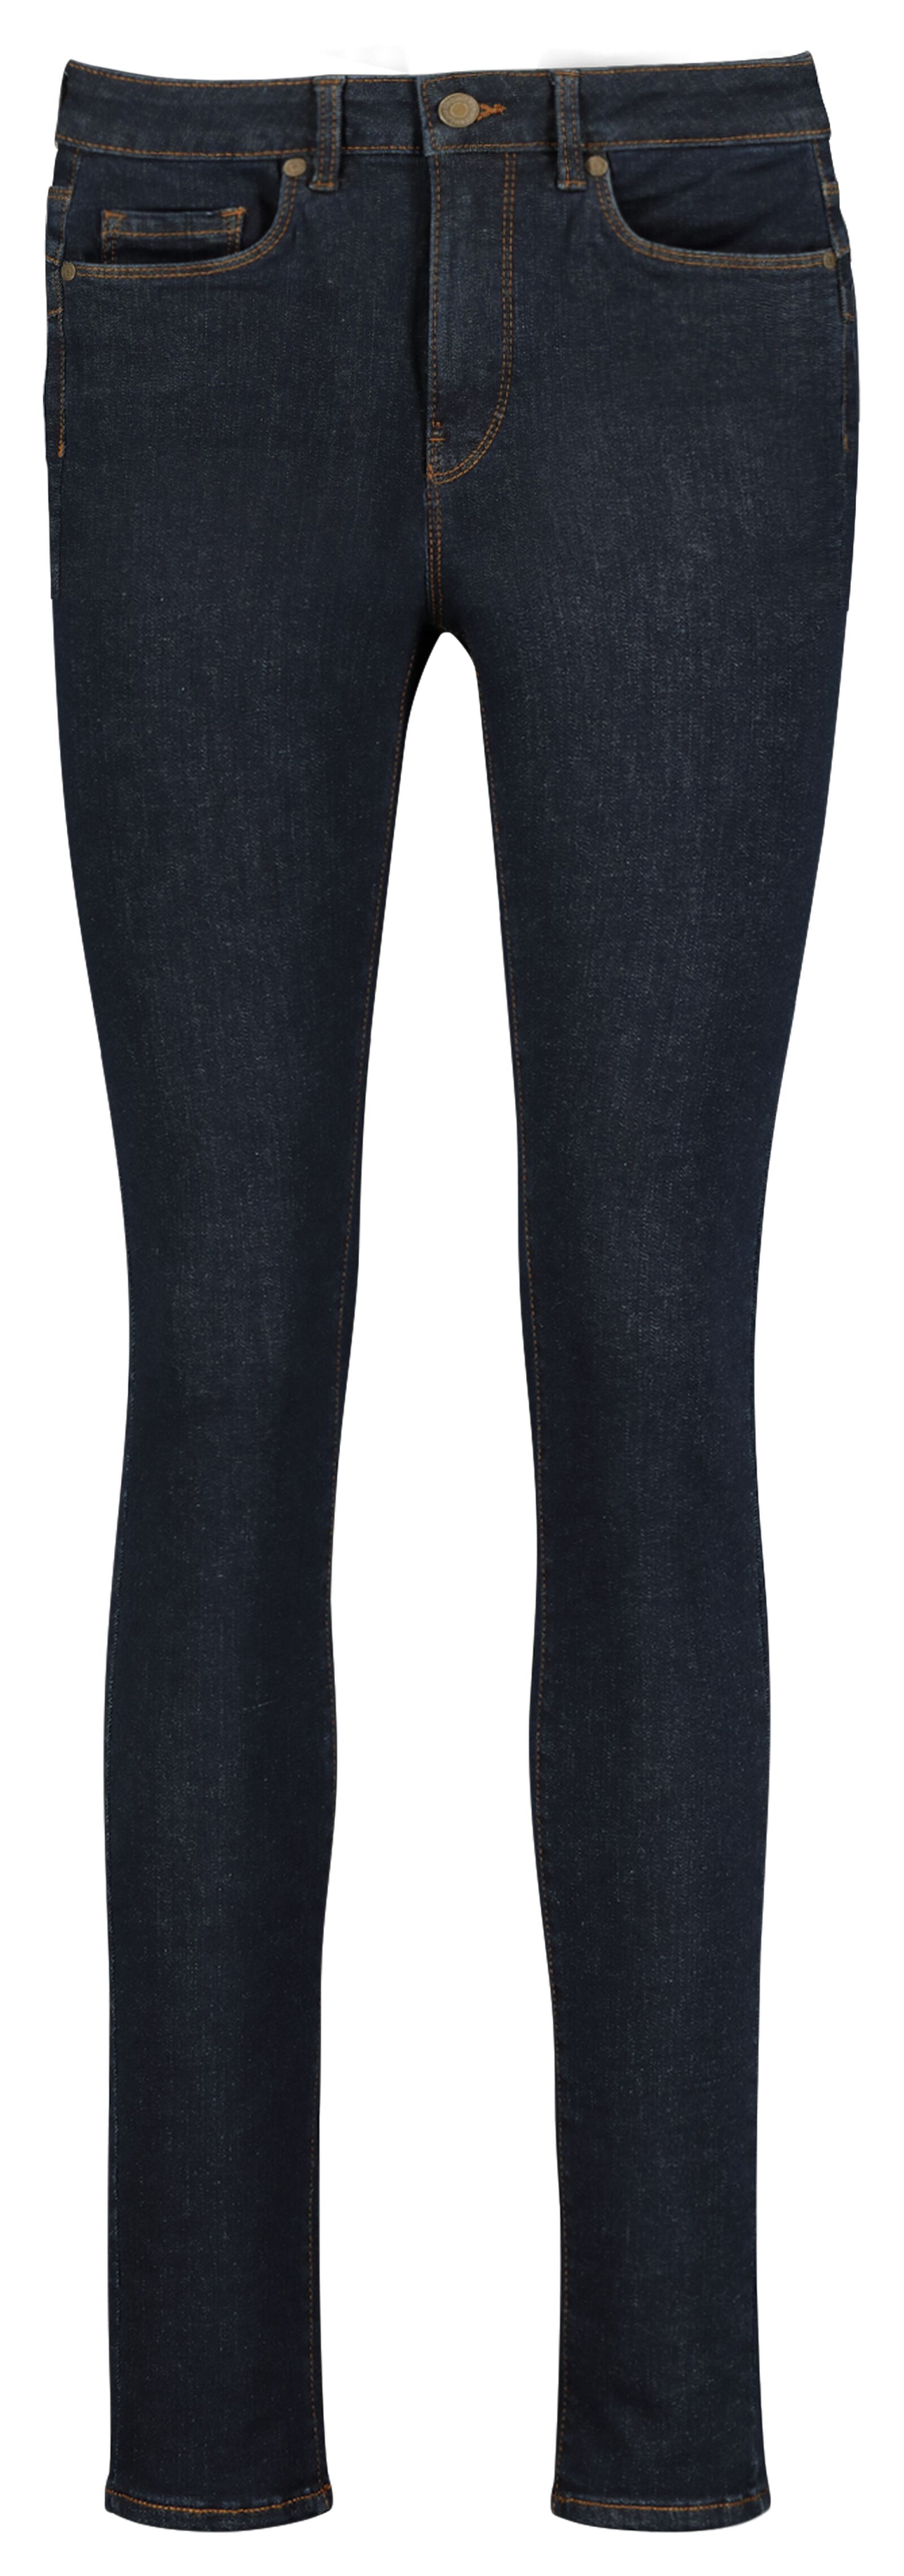 dames jeans - shaping skinny fit donkerblauw - HEMA